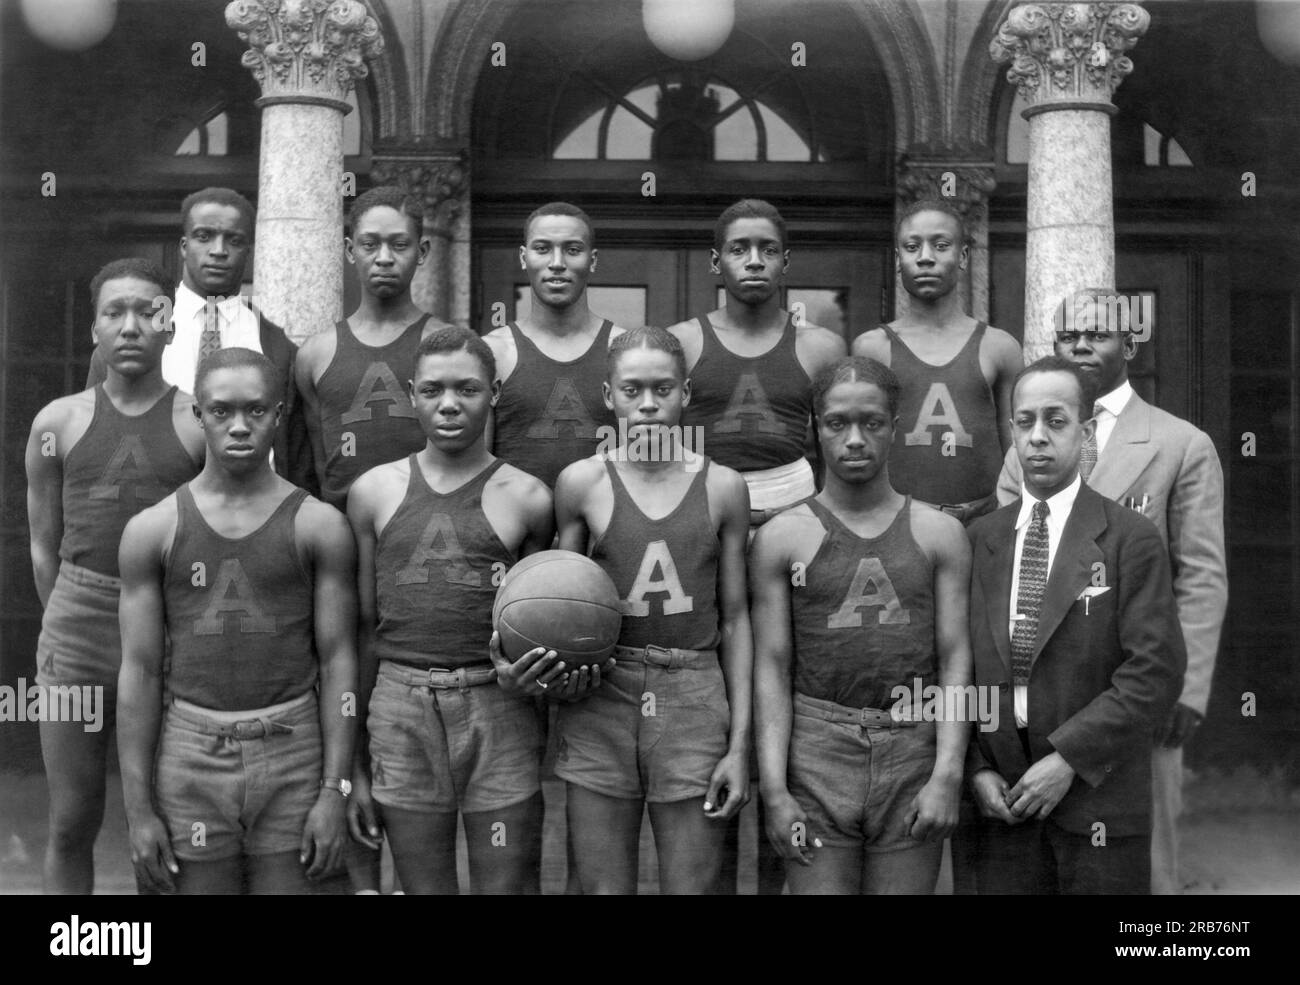 Indianapolis, Indiana:  c. 1928The portrait of the African American basketball team at Crispus Attucks high school and their coach, E.J. Hooper. Stock Photo